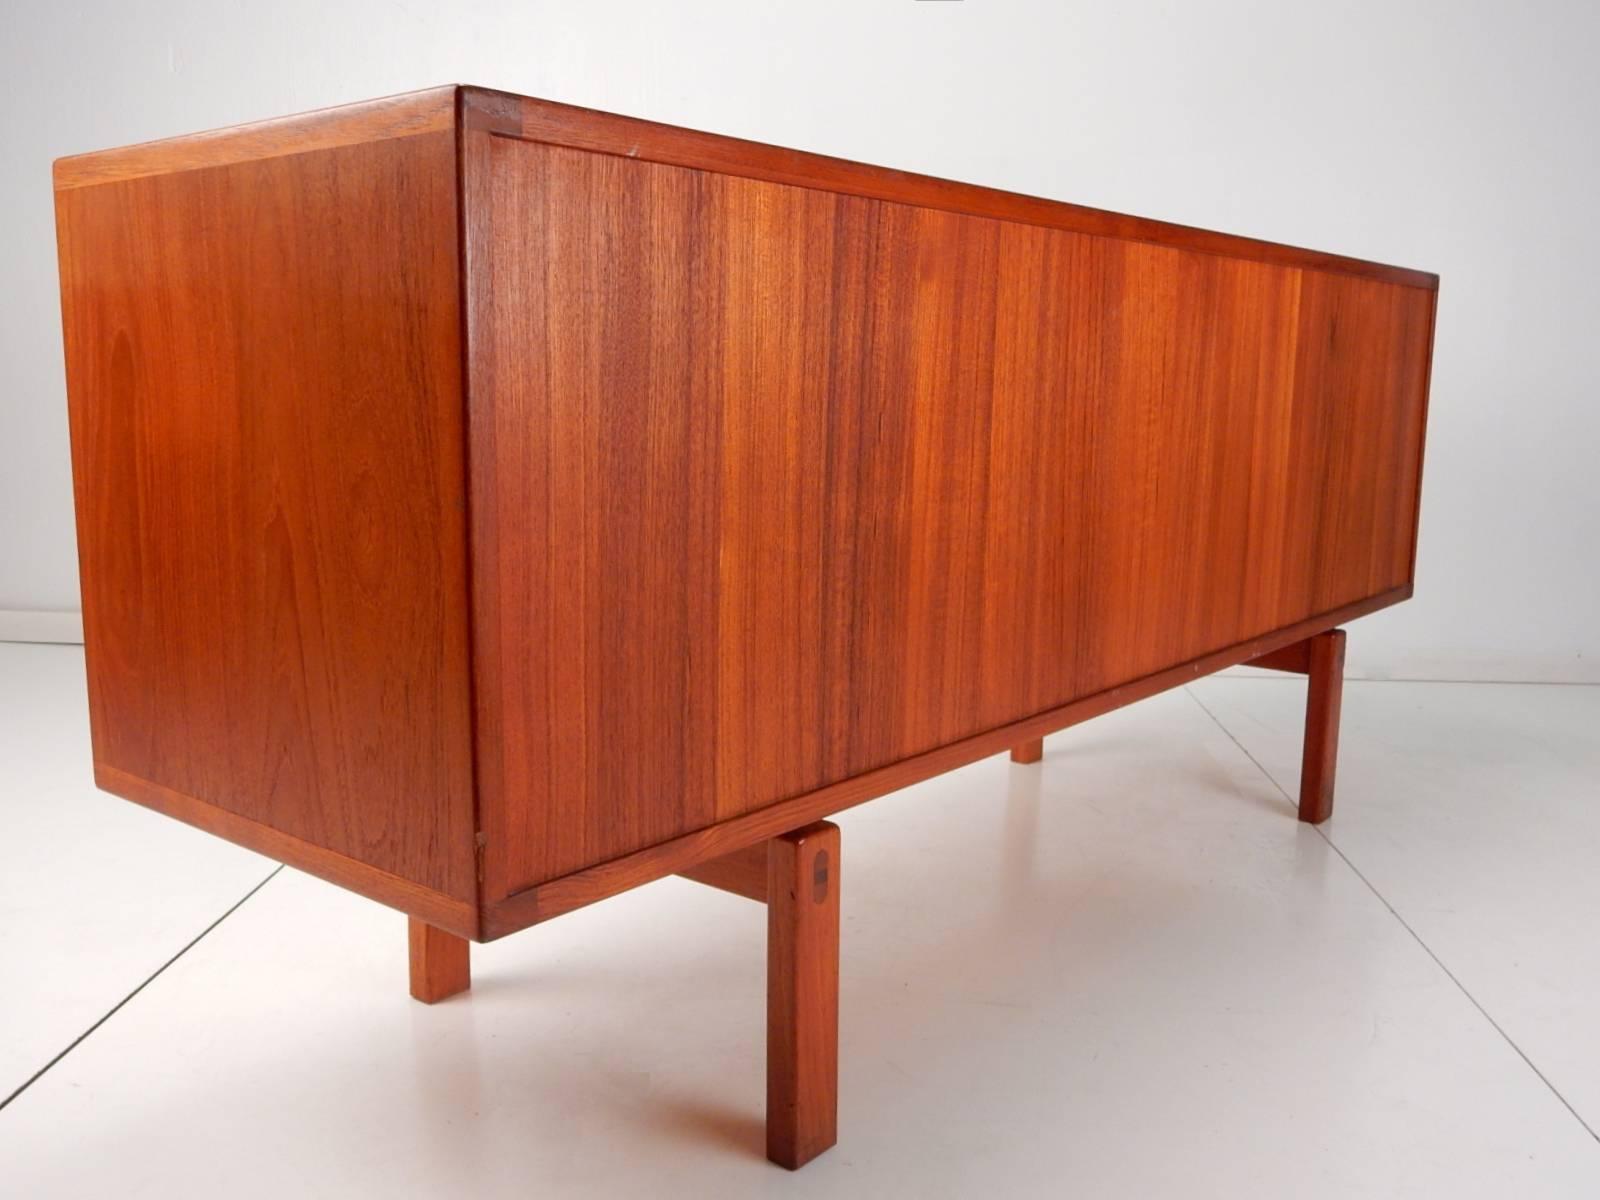 1950s Lennart Bender for Ulferts of Sweden sideboard cabinet from the 'Corona' line.
Teak with rosewood inlay pulls. Beautiful finished back with stupendous grain.
Four drawers with the top being felt lined and a separate mini flatware